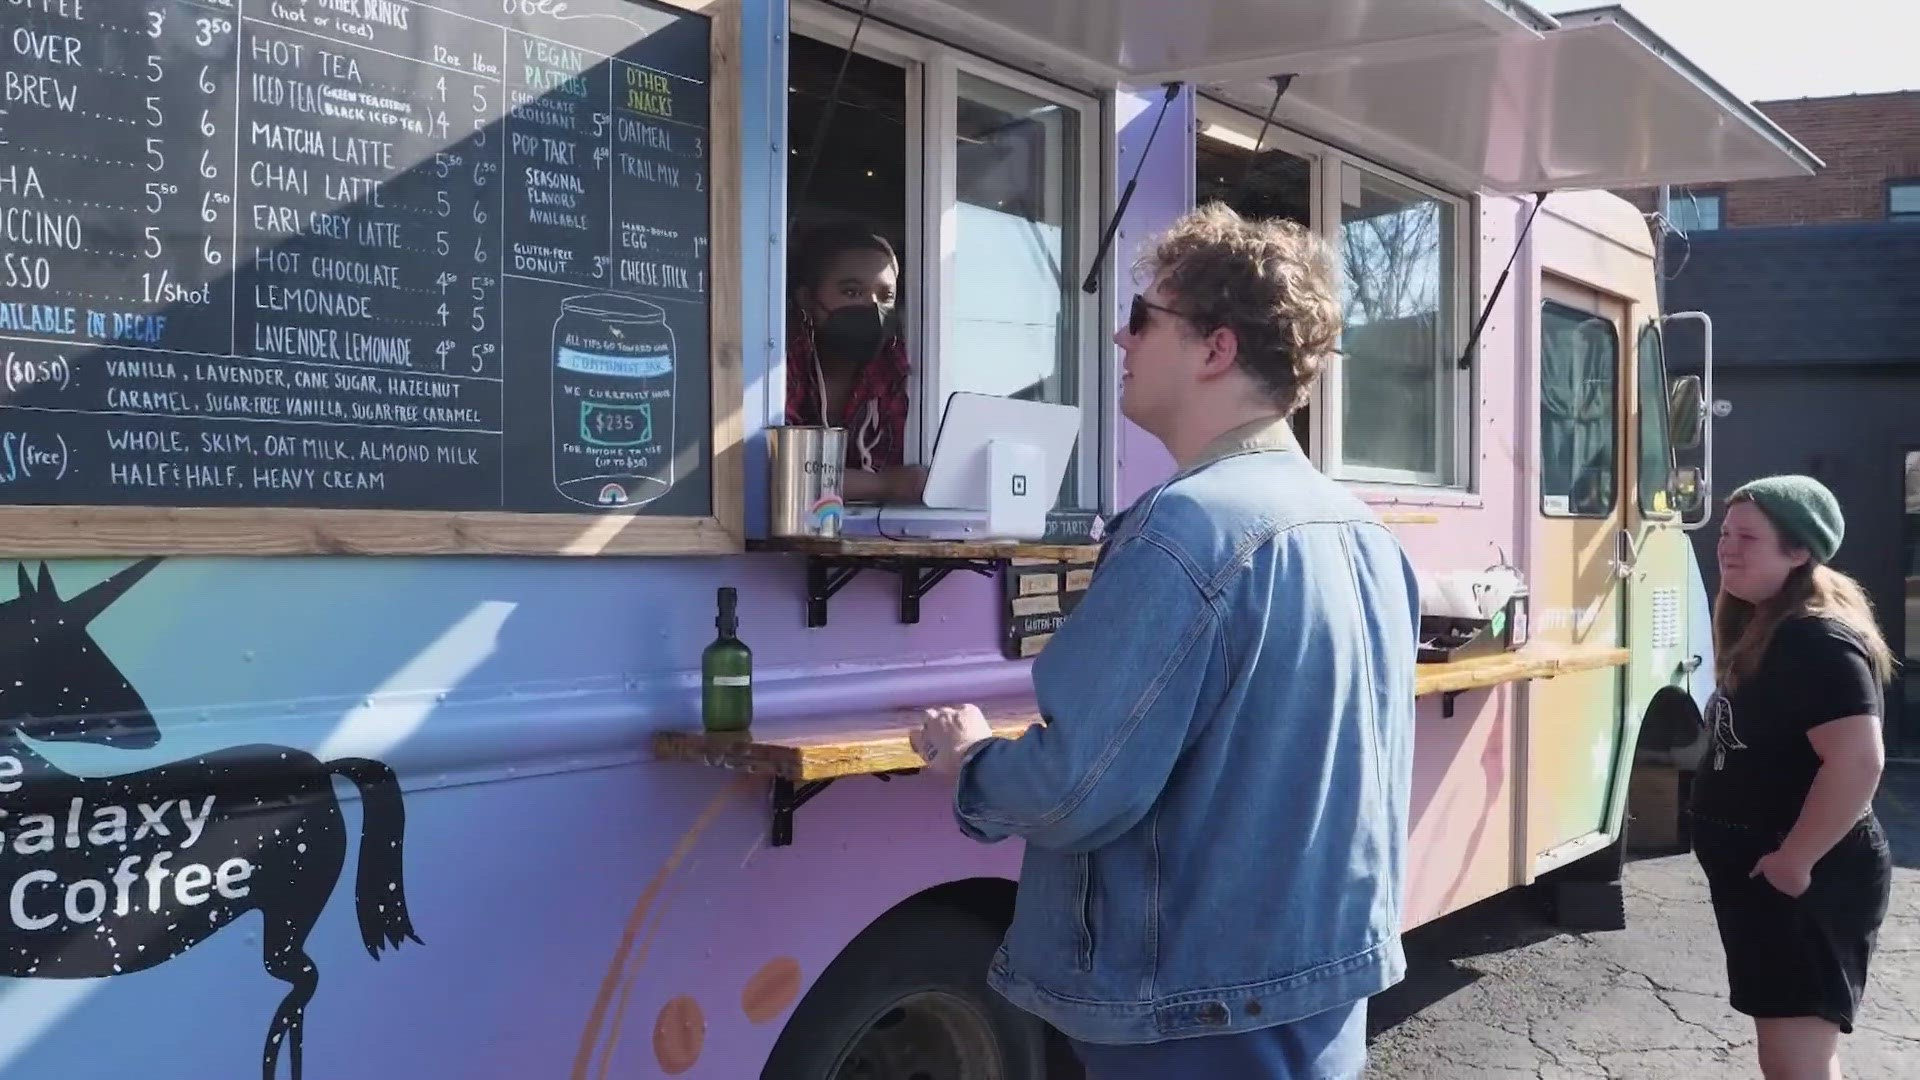 A beloved central Ohio food truck, The Galaxy Coffee, is celebrating its grand reopening at new permanent location.